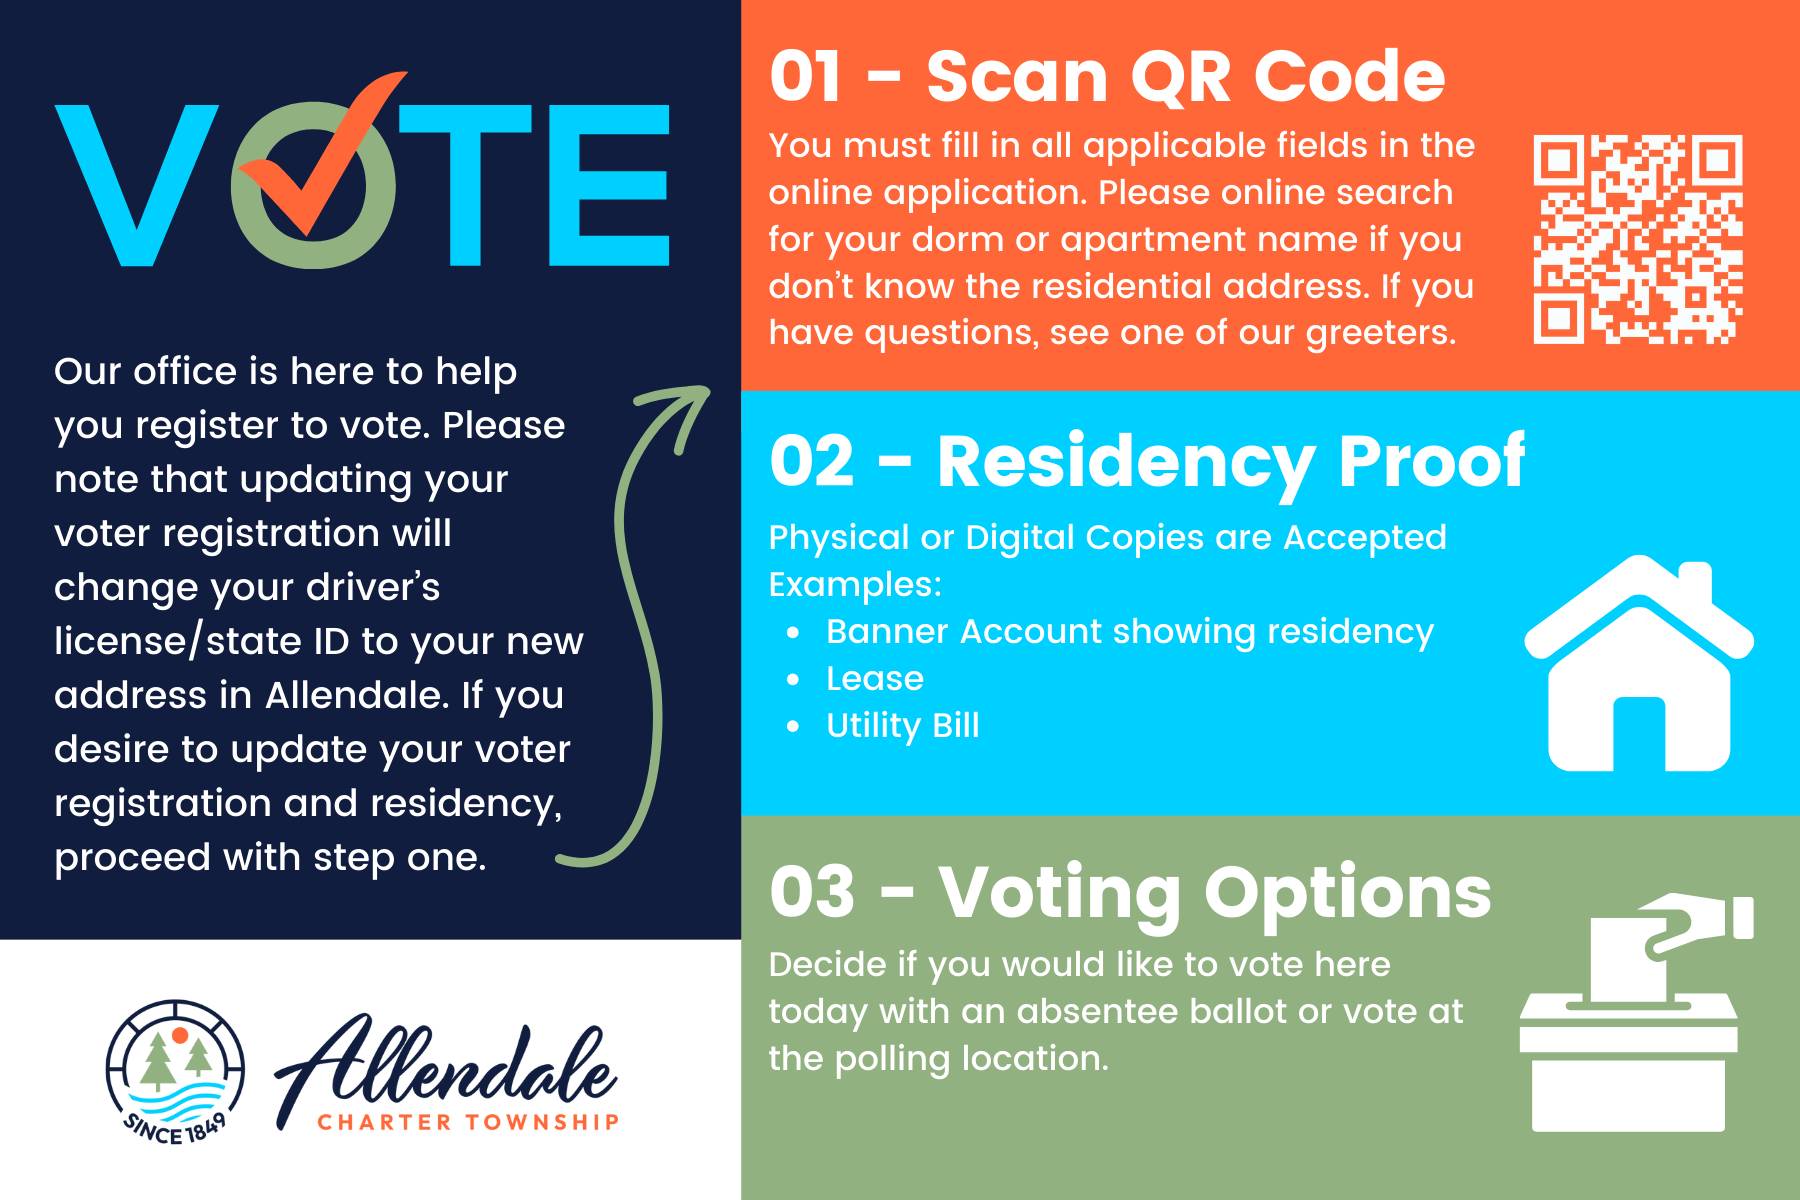 QR code to find your on-campus address, explanation of proof of residency, and what voting options students regarding in-person or absentee voting